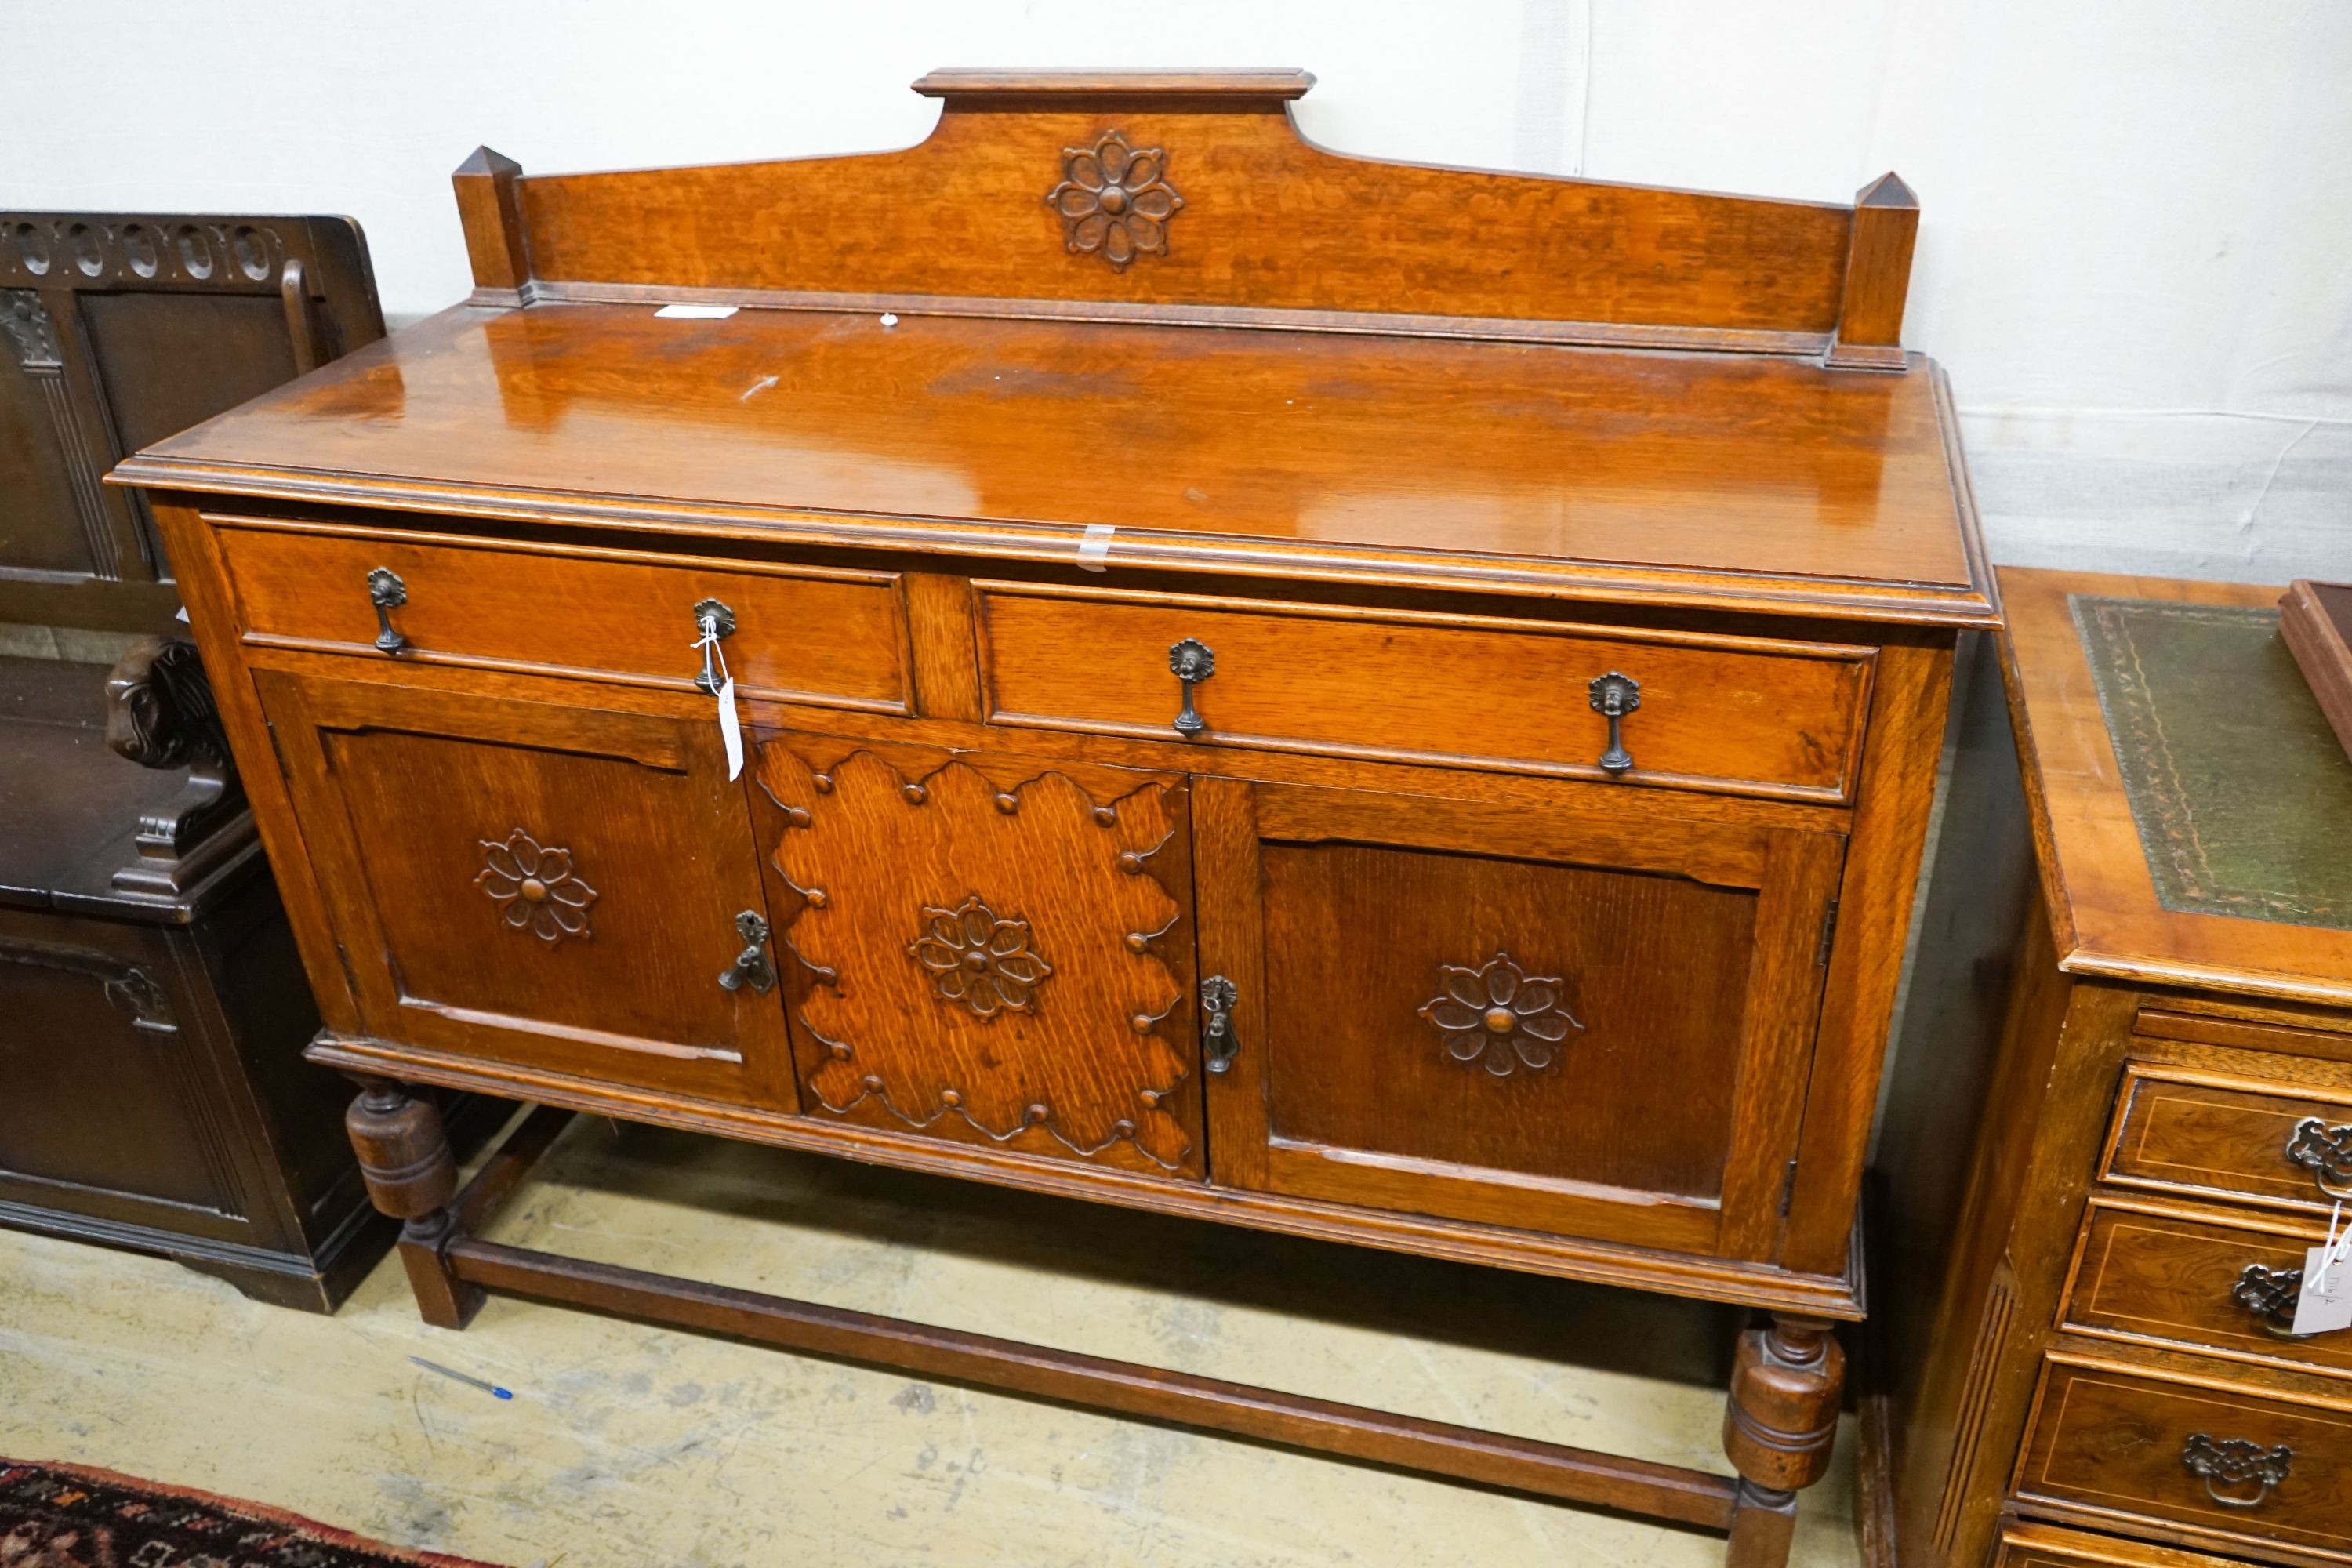 An 18th century style oak monks bench together with a 1920's oak sideboard